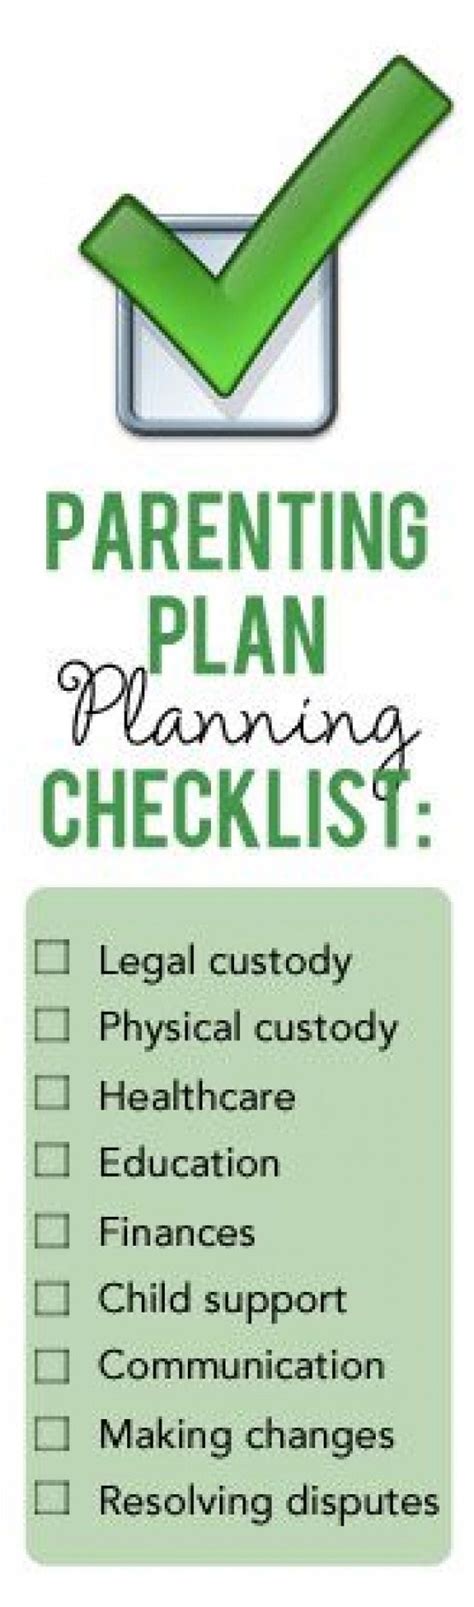 This divorce checklist will help you prepare for divorce by building a support team, gathering documents and personal info, and inventorying your property. parenting-planning-checklist #divorce | Parenting plan, Child custody mediation, Parenting